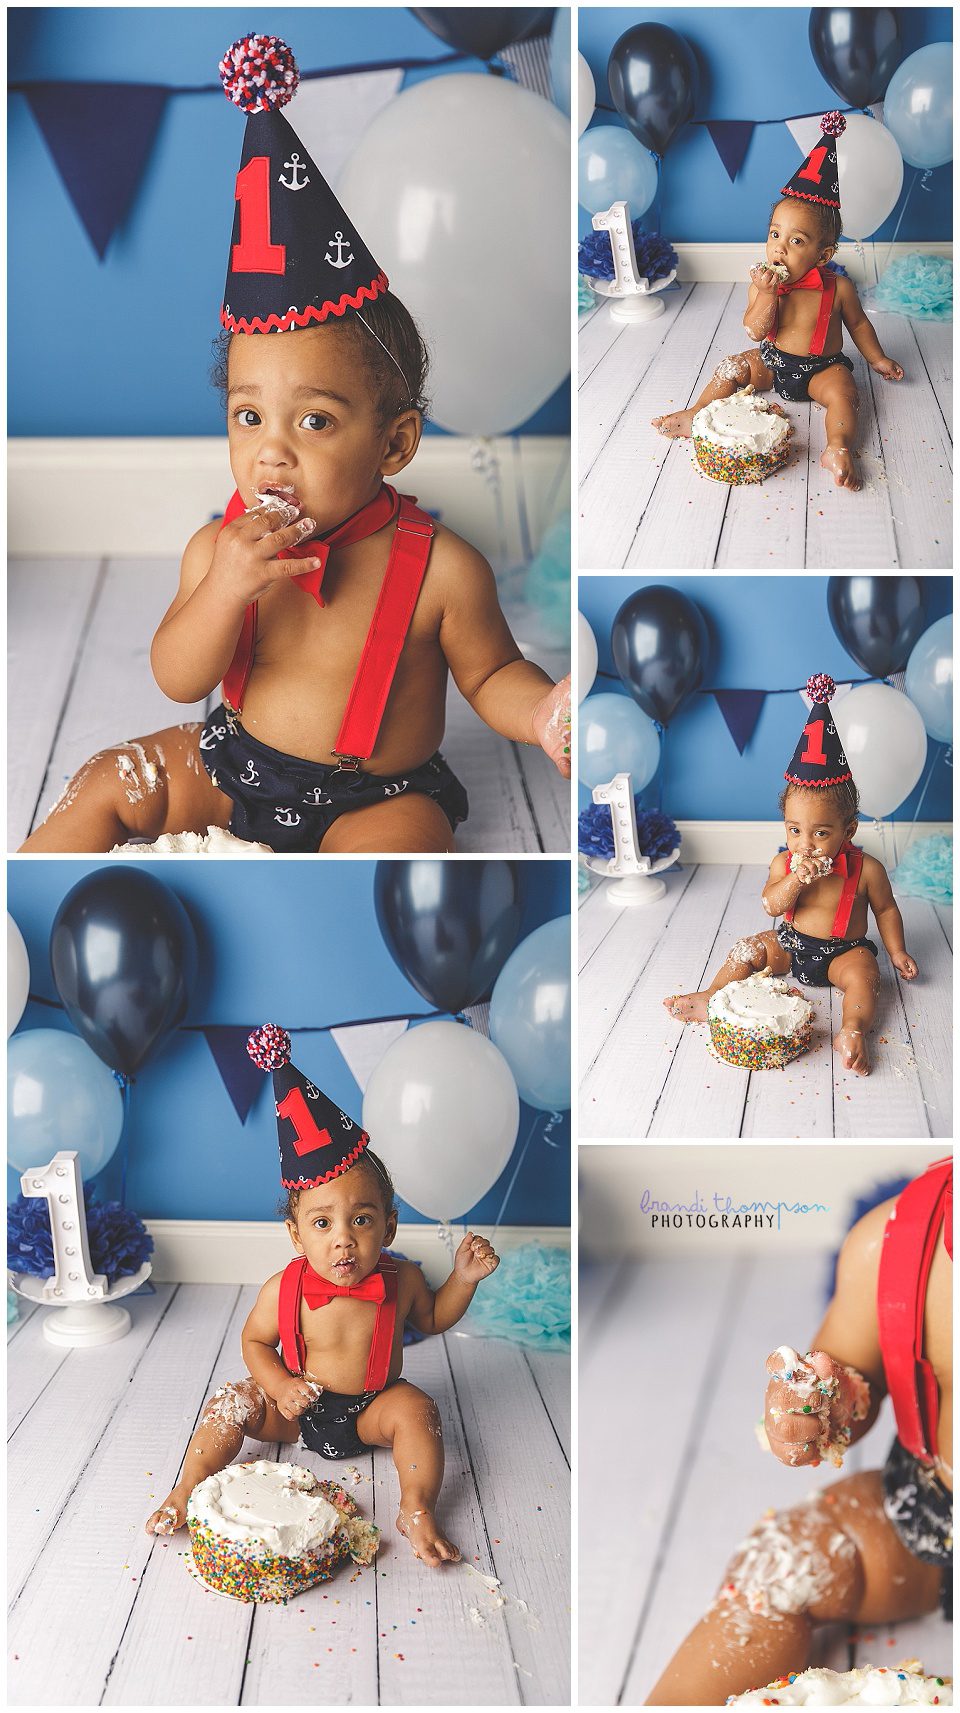 a Black baby boy with a cake in a navy blue and red suspender outfit and birthday hat, in front of a blue and white birthday background, plano, tx